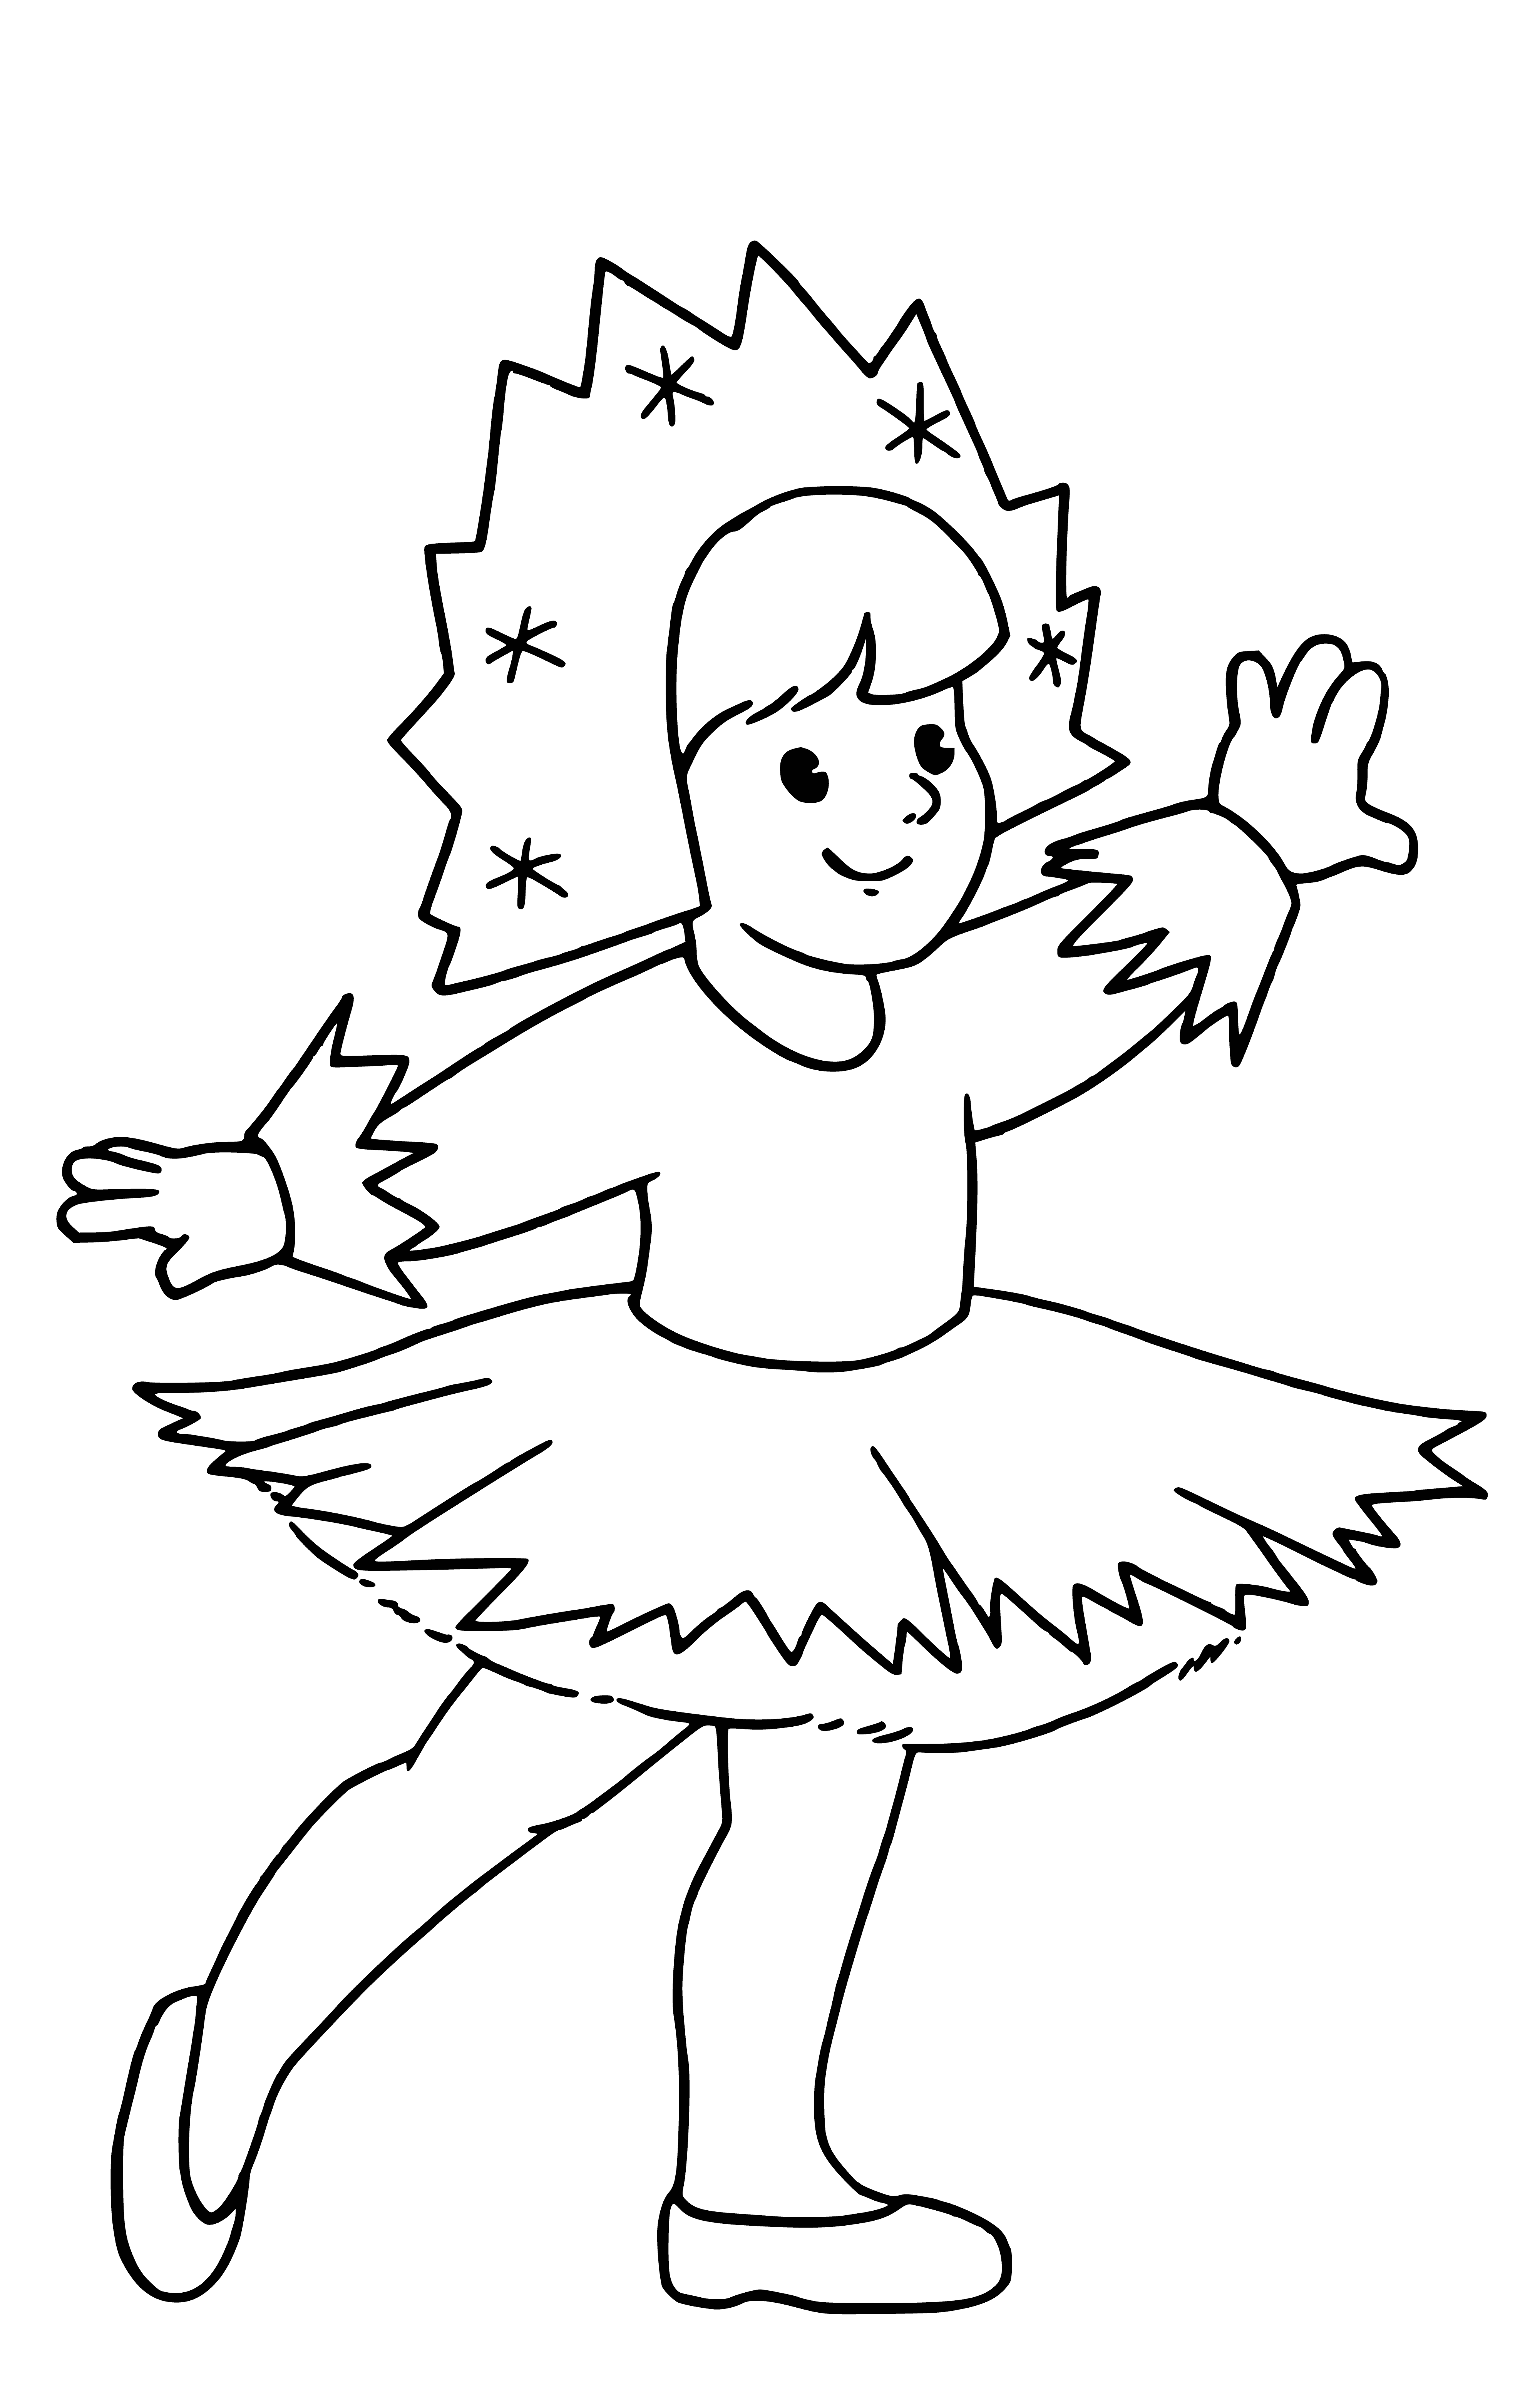 coloring page: White snowflake costume with silver accents, fur-covered arms/legs, white hood w/ silver accents & fur trim.